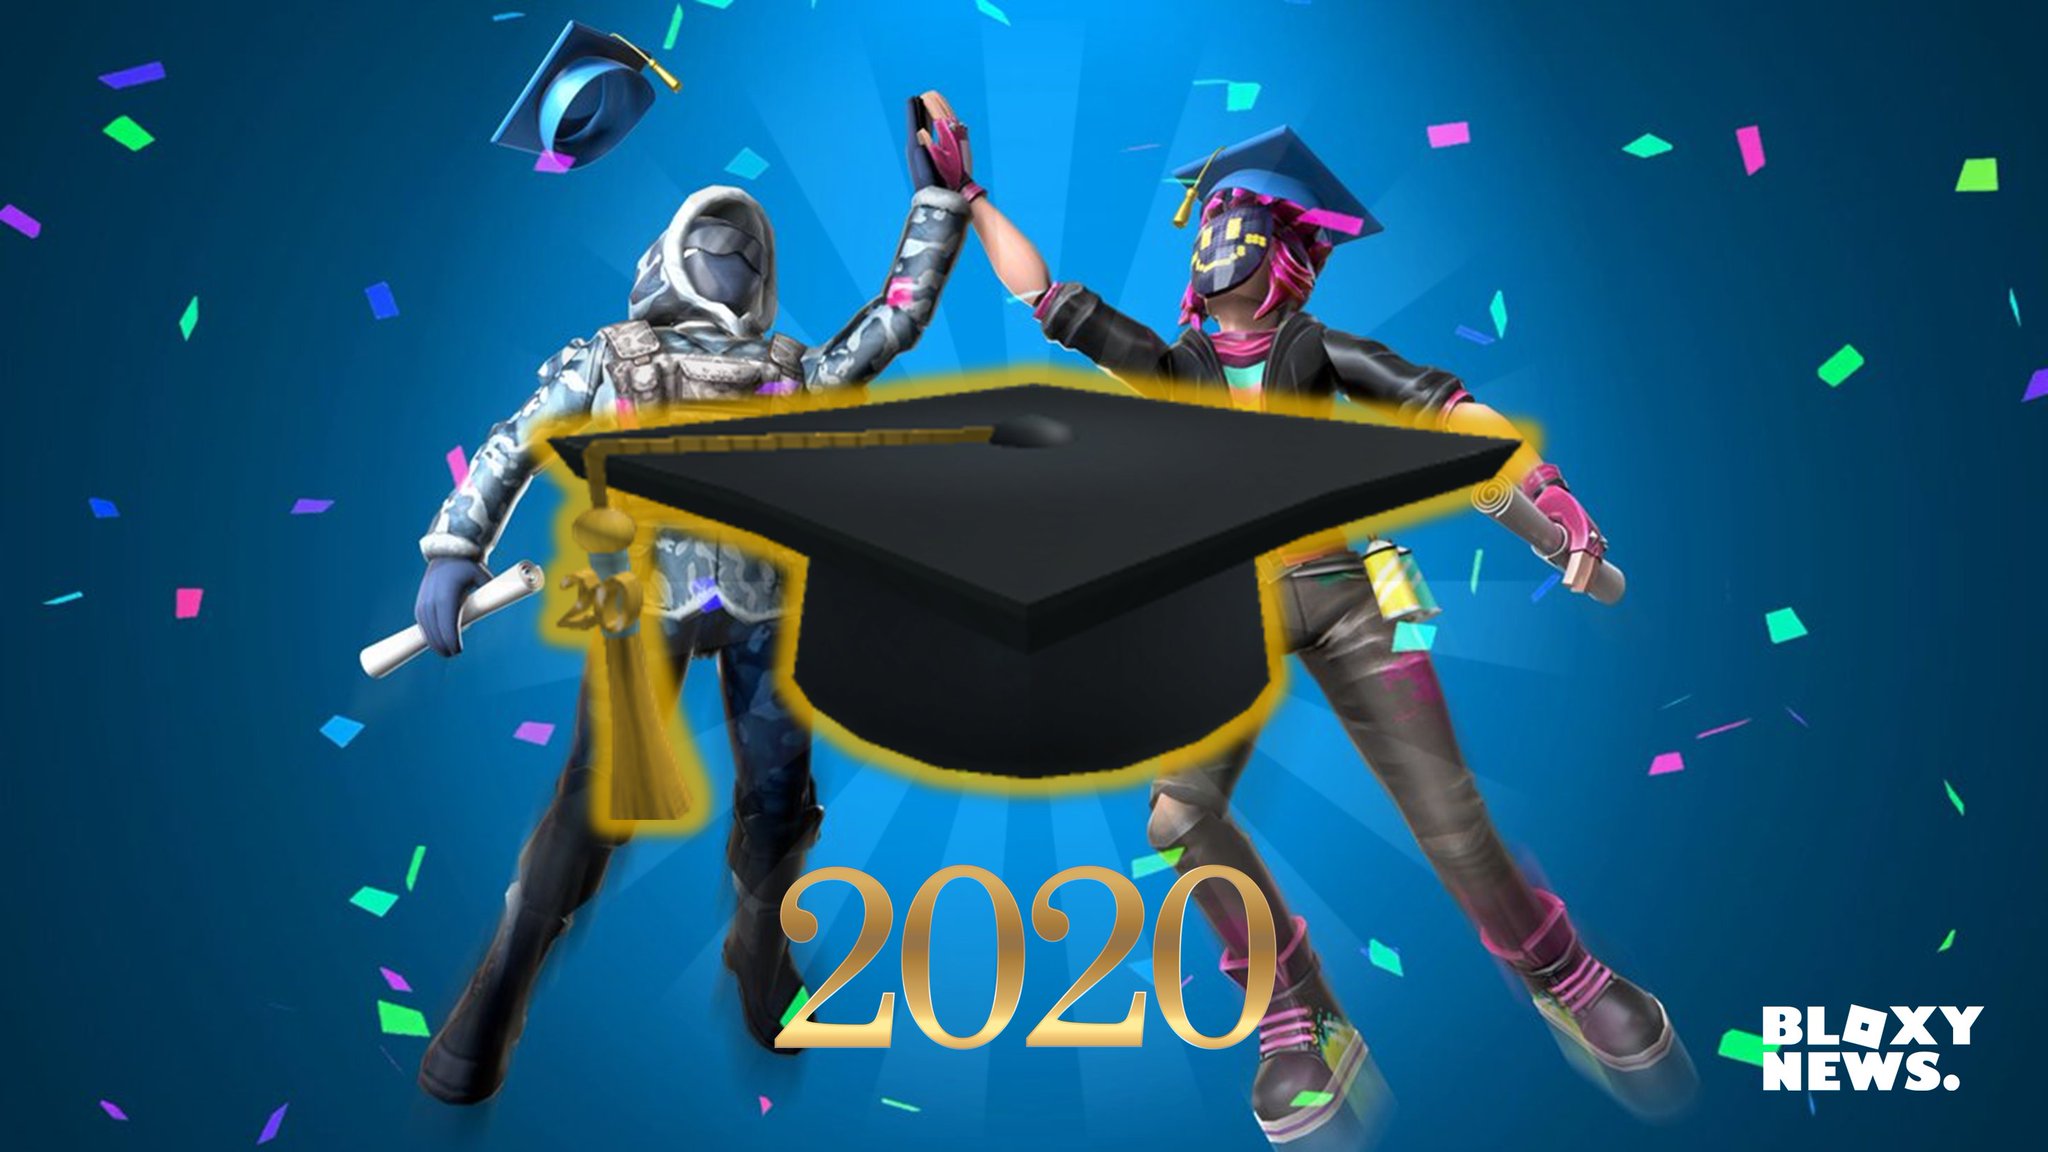 Bloxy News On Twitter Classof2020 The End Of This School Year May Not Have Been How You Wanted To Celebrate Graduating So Why Not Celebrate Virtually Get The 2020 Graduation - bloxy news on twitter even valkyries need a break get the new summer valk for r 25 000 for the roblox labordaysale https t co c0ojmh9zoi https t co xhfmszabx3